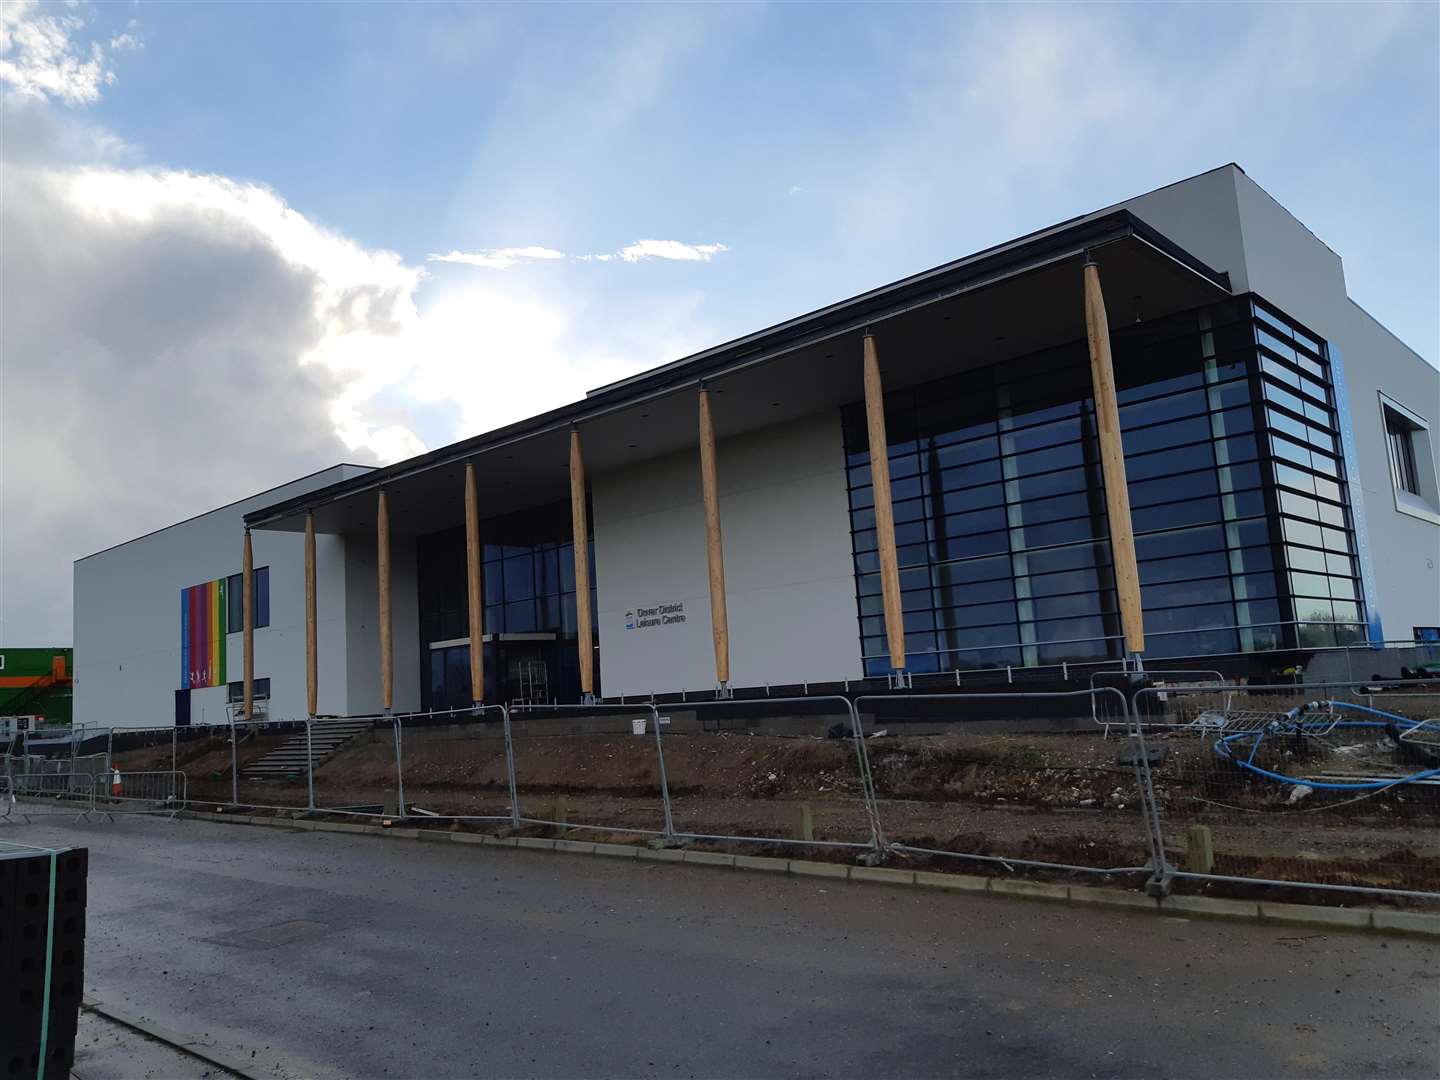 The new Dover District Leisure Centre during its last months of construction